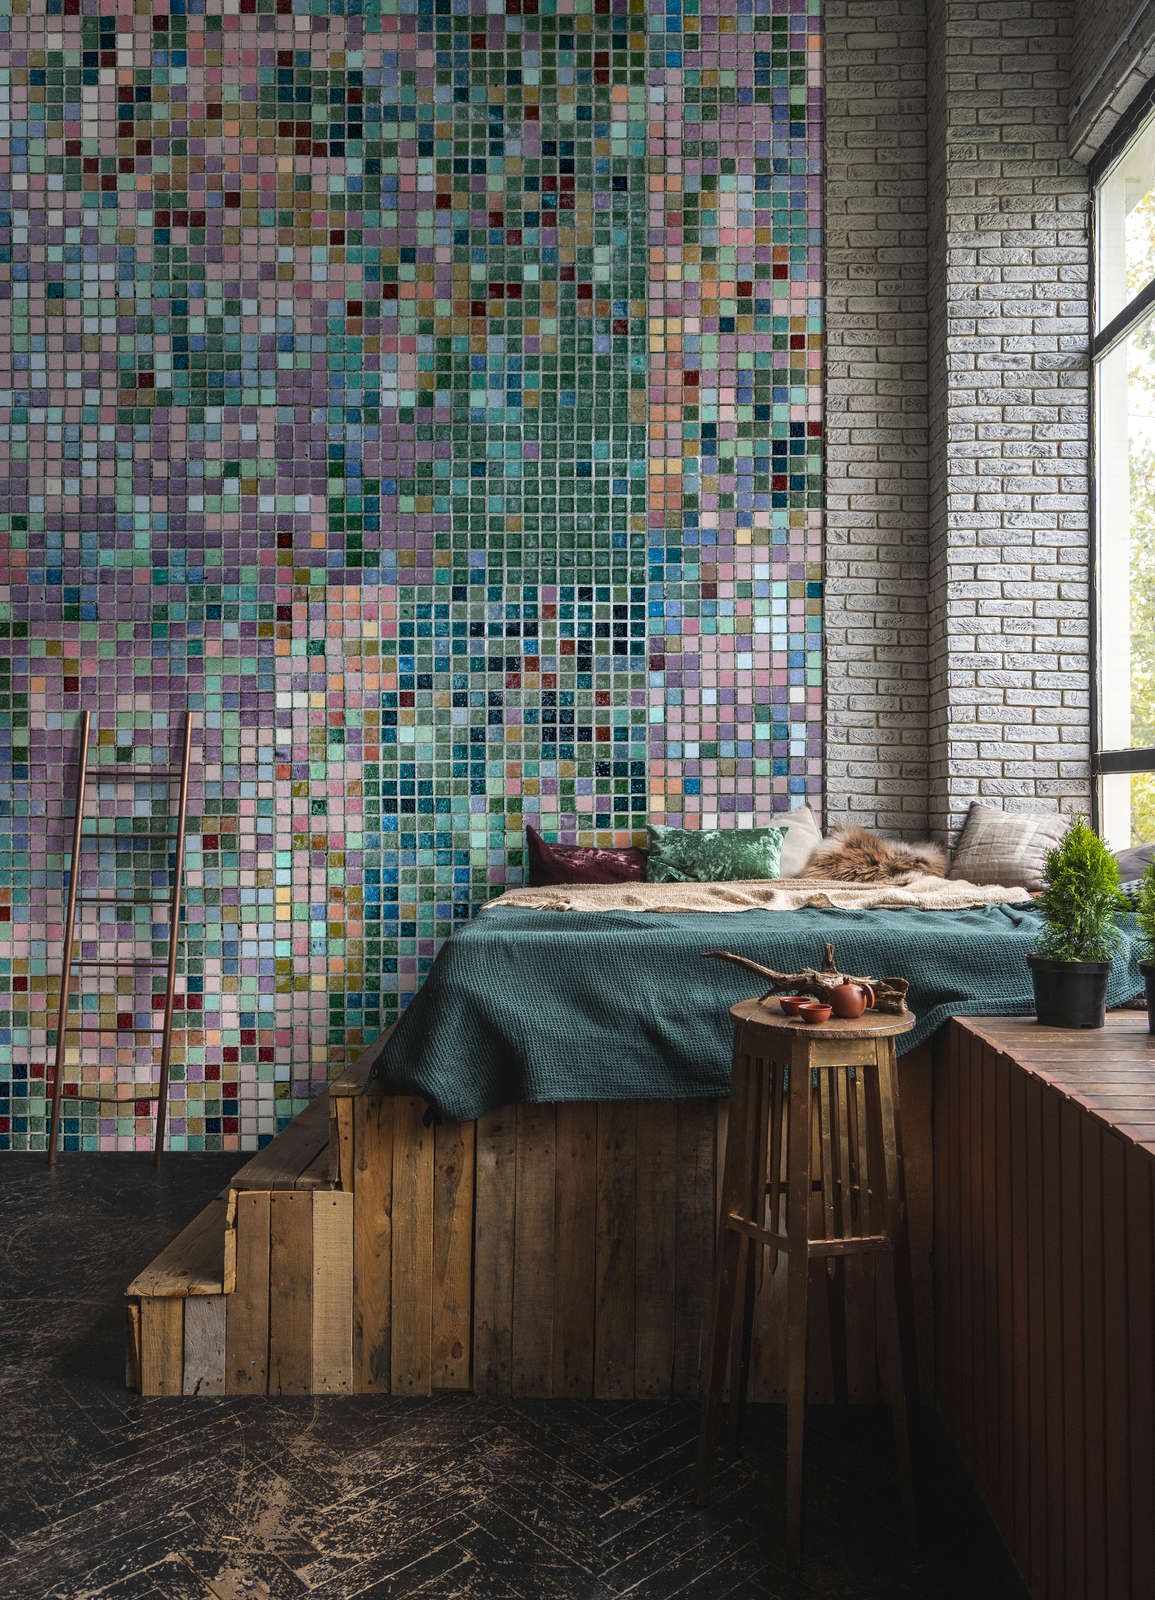             Photo wallpaper »grand central« - Mosaic pattern in bright colours - Lightly textured non-woven fabric
        